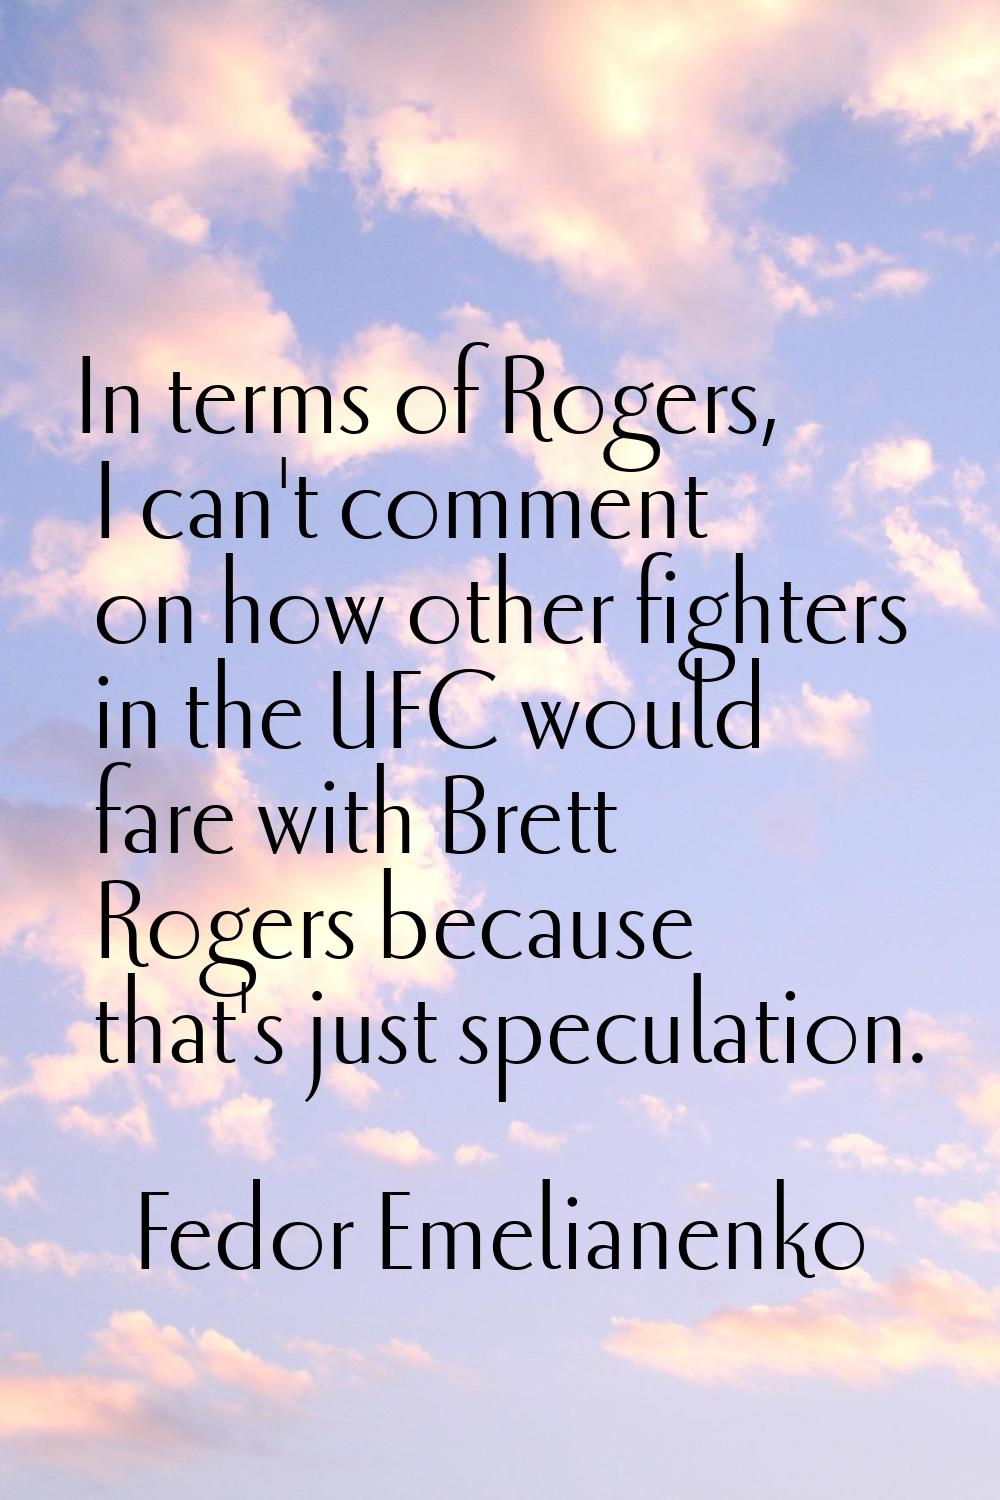 In terms of Rogers, I can't comment on how other fighters in the UFC would fare with Brett Rogers b